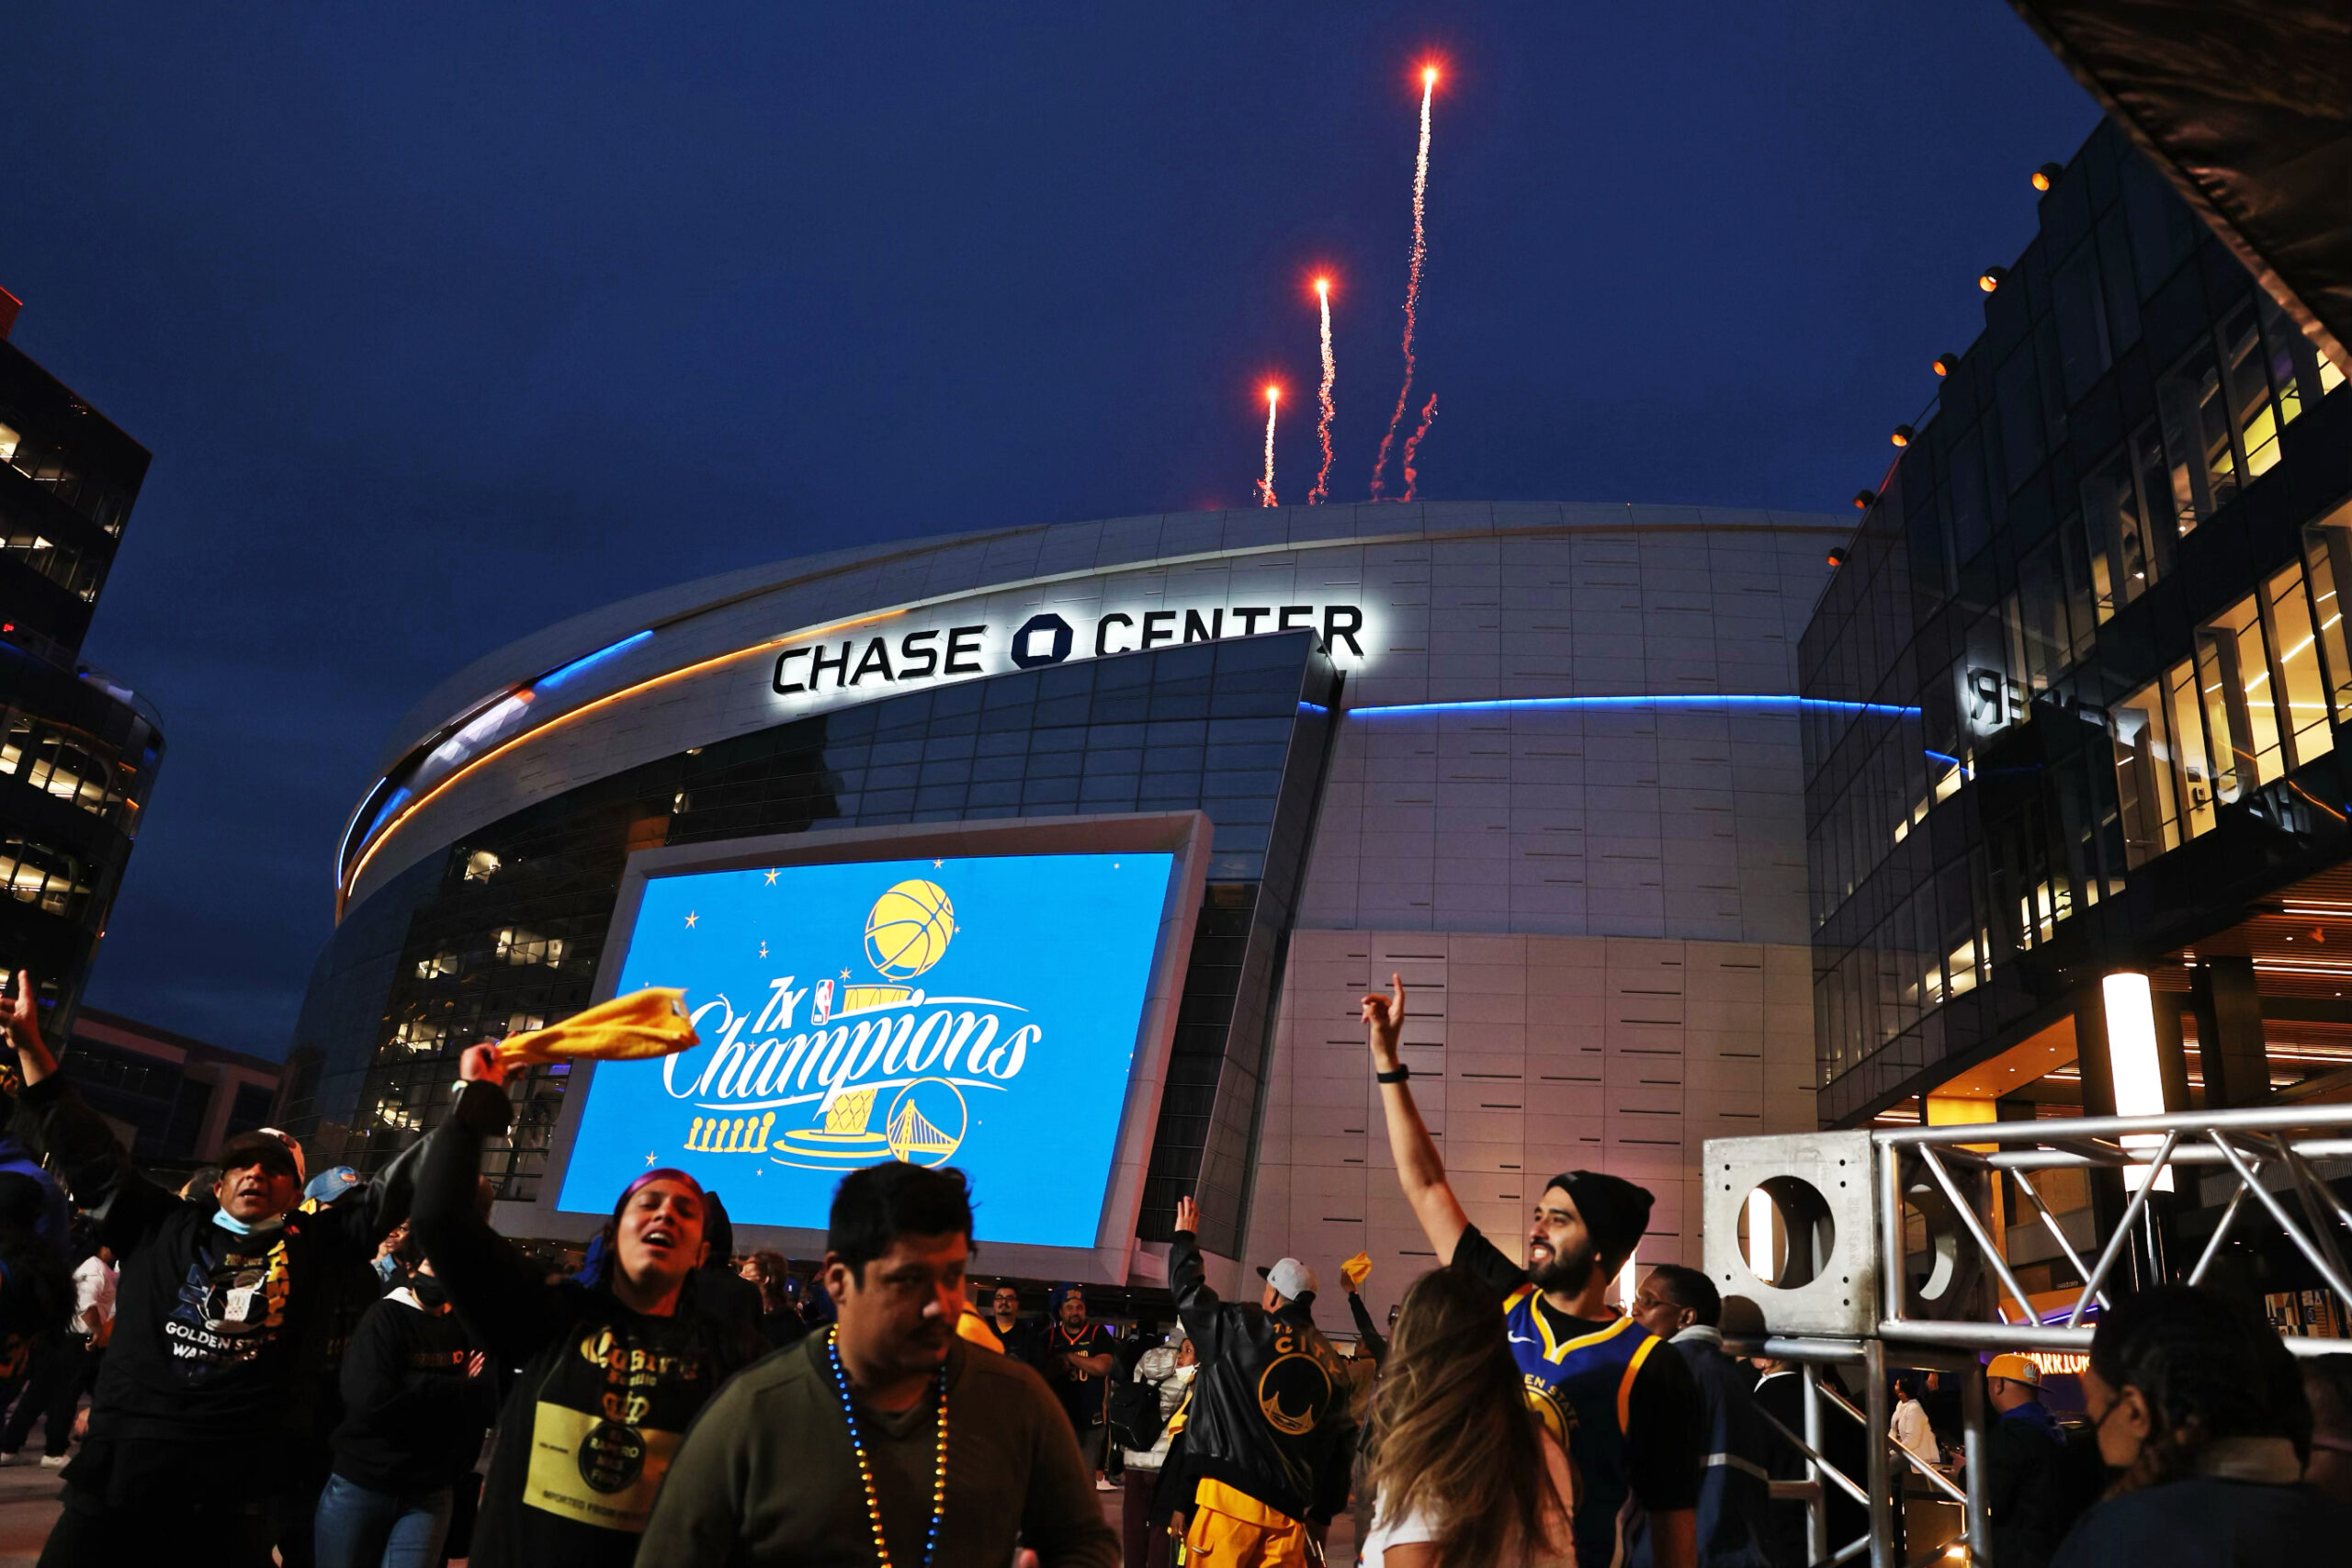 Fireworks explode and fans cheer to celebrate outside Chase Center.